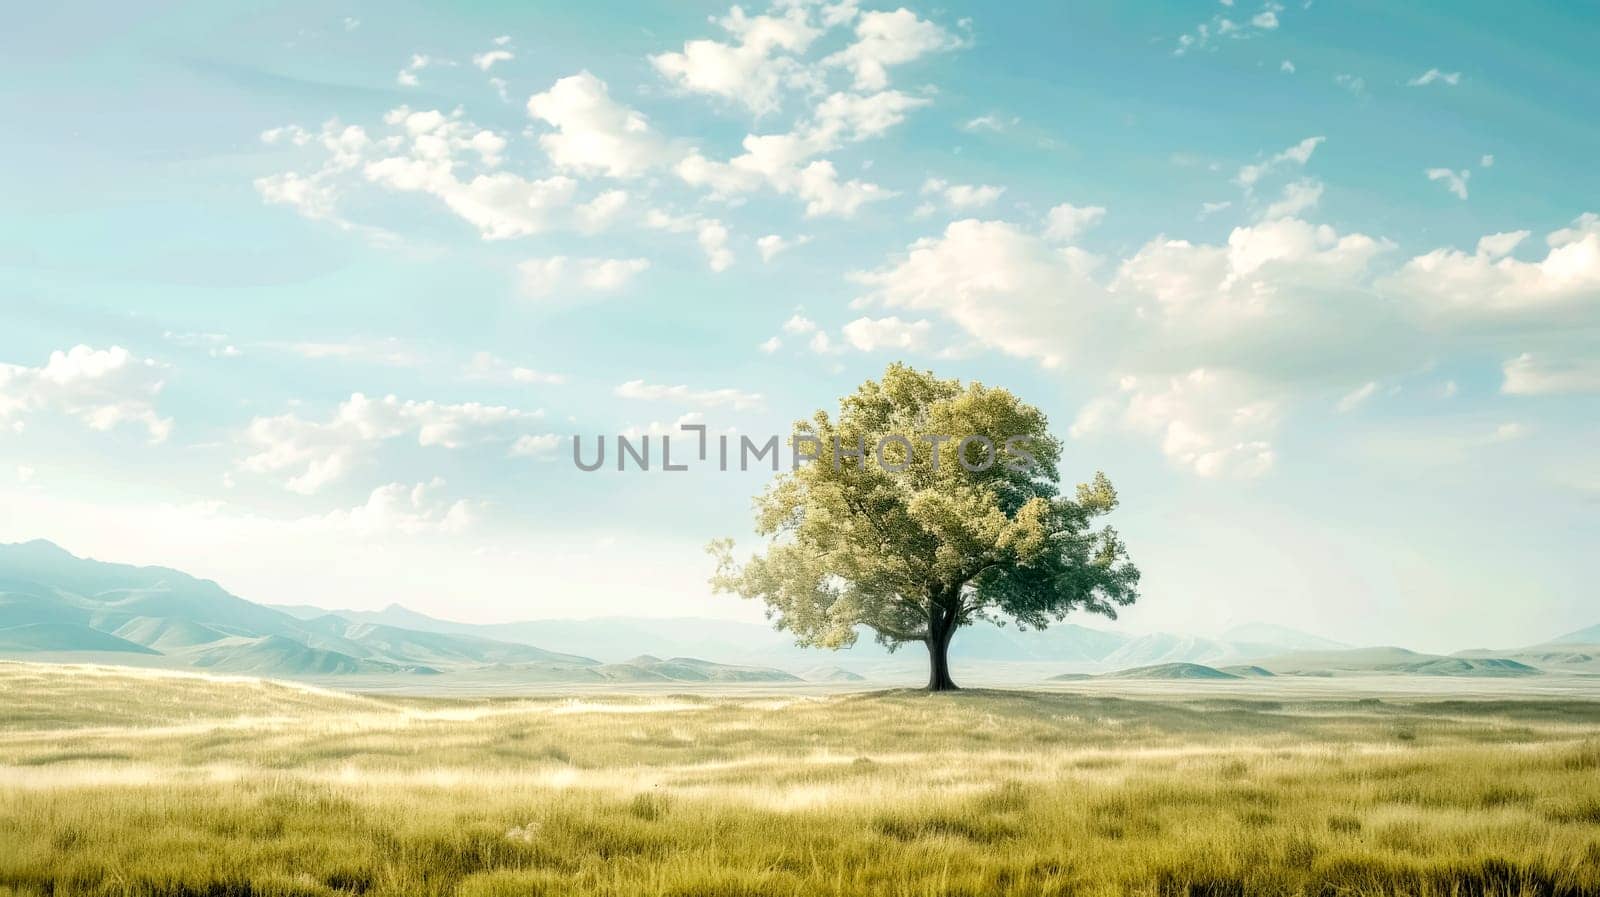 Tranquil scene featuring a single tree in a vast, sunlit meadow with distant mountains